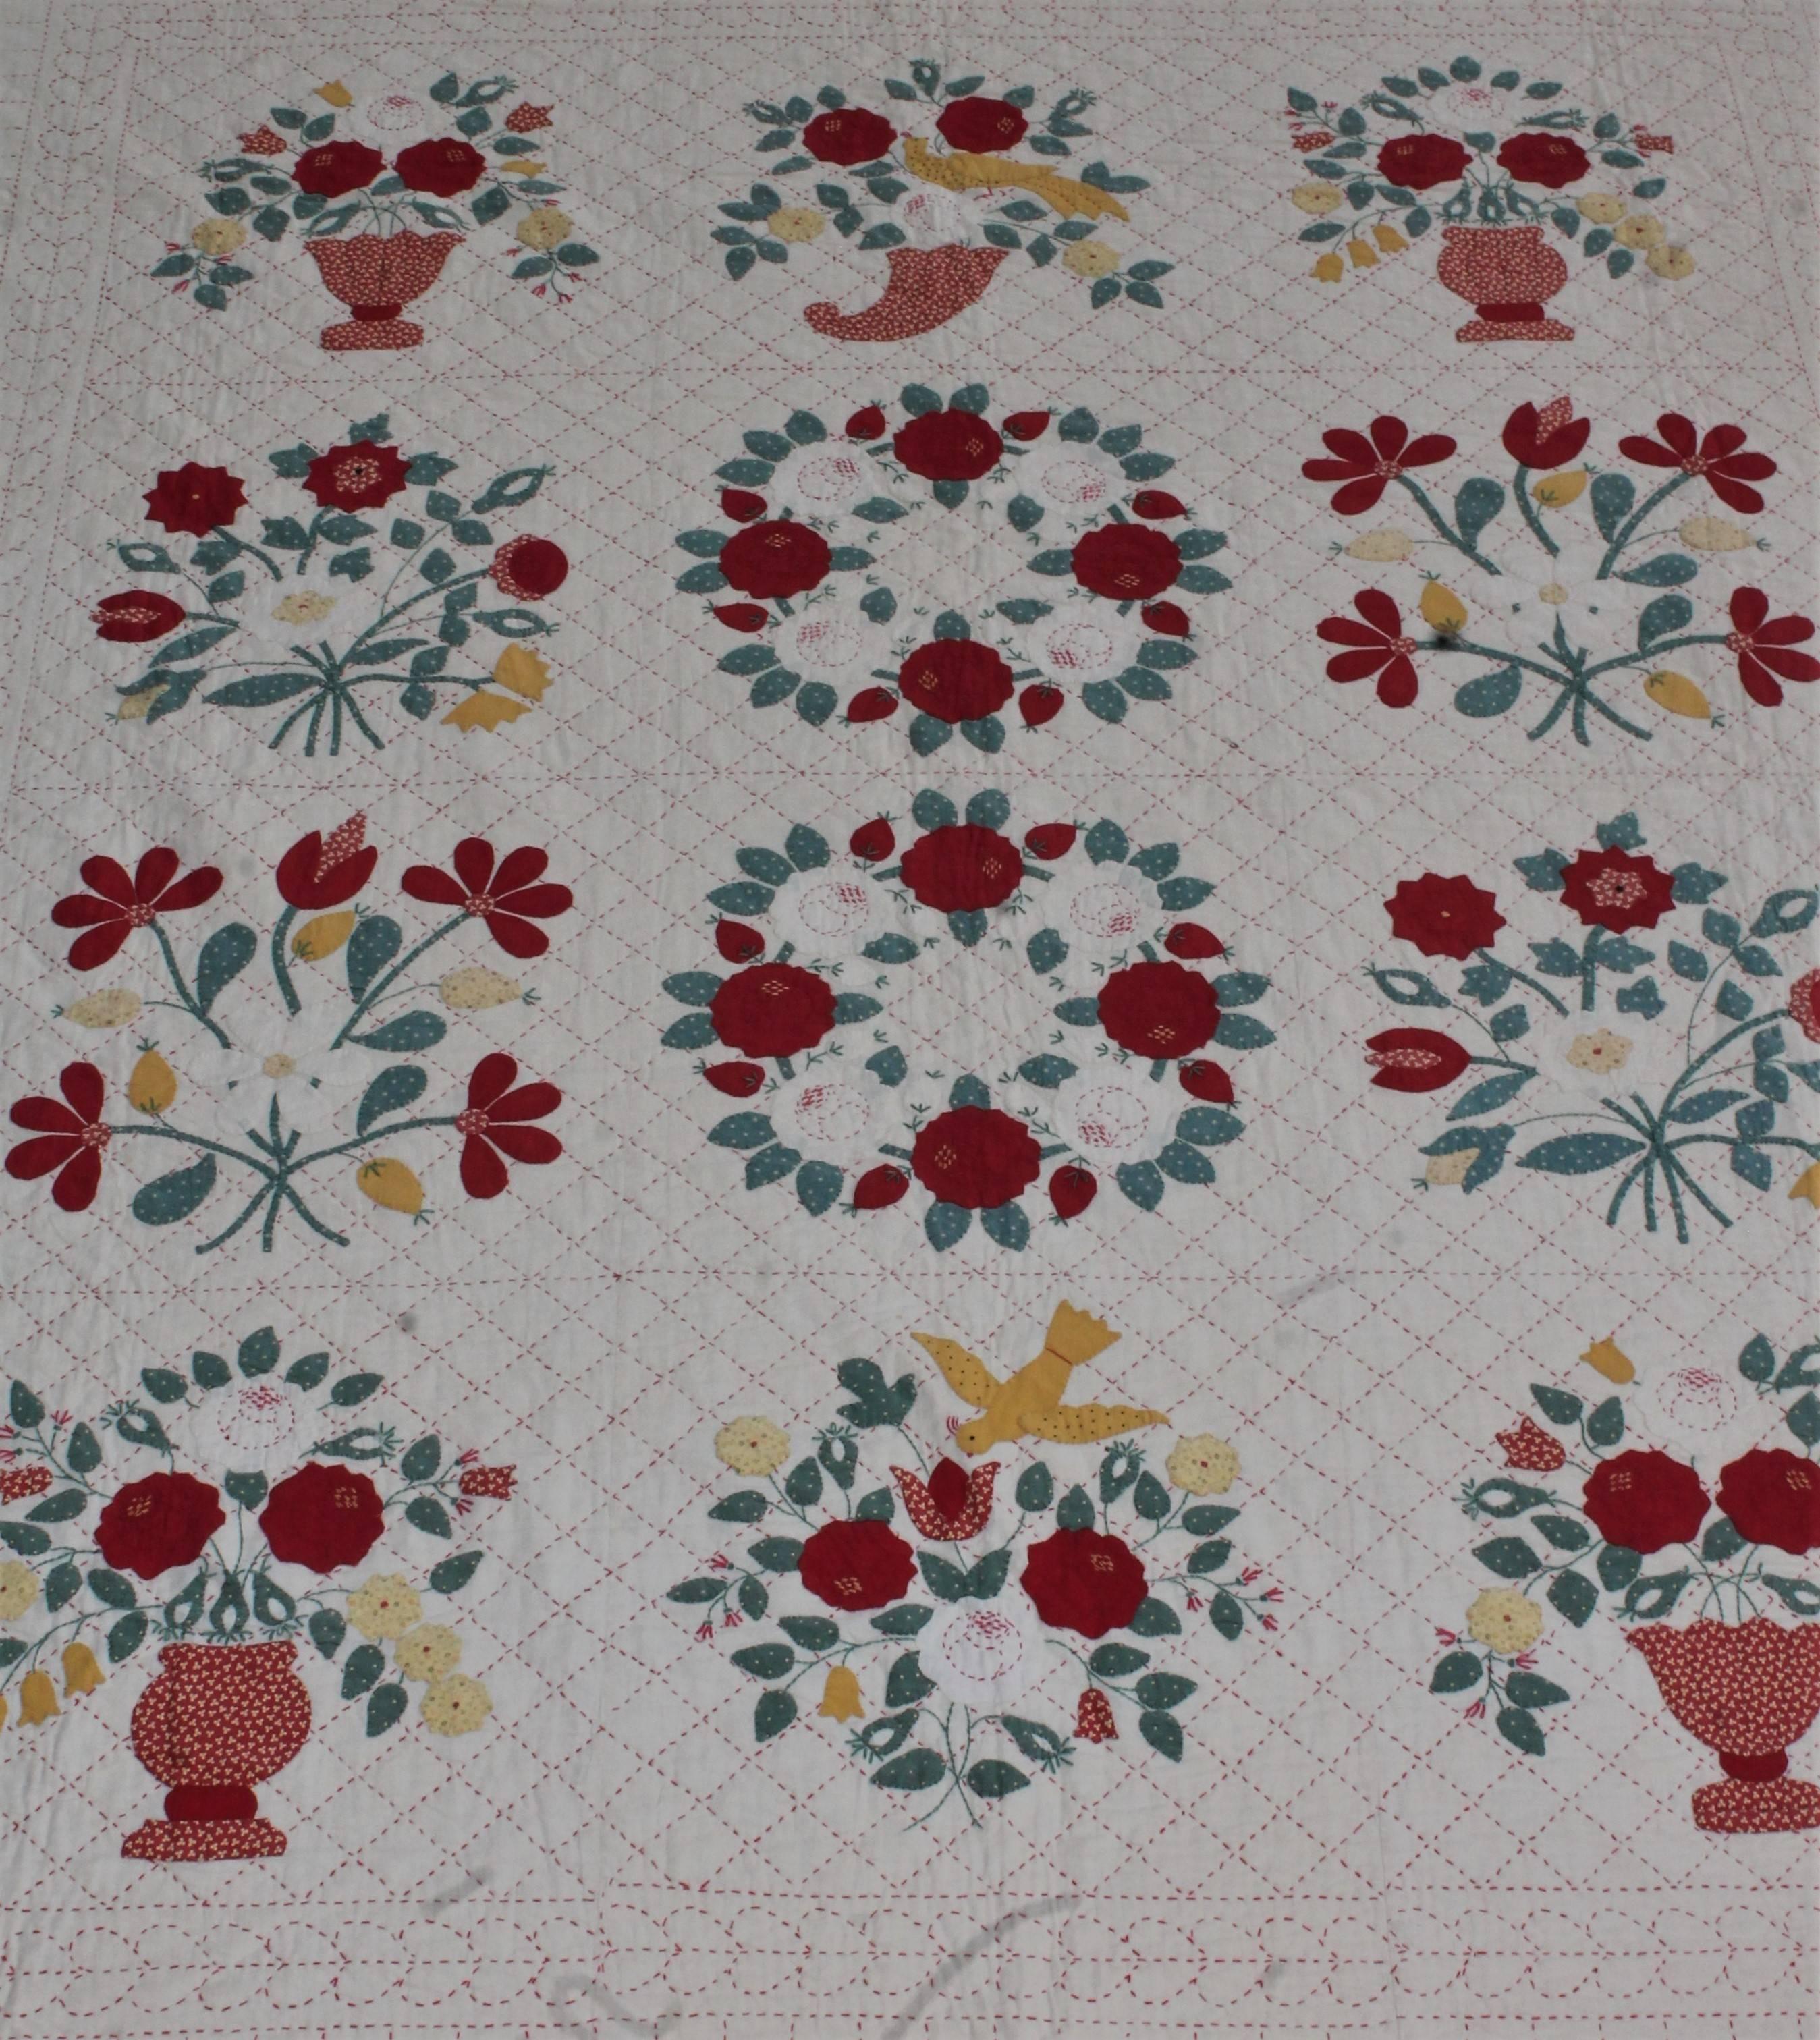 Beautifully executed all hand stitched applique and finely stitched Album quilt. This quilt is unusually quilted in red threading instead of white. This makes it much more visible to see the heavy quilting detail.